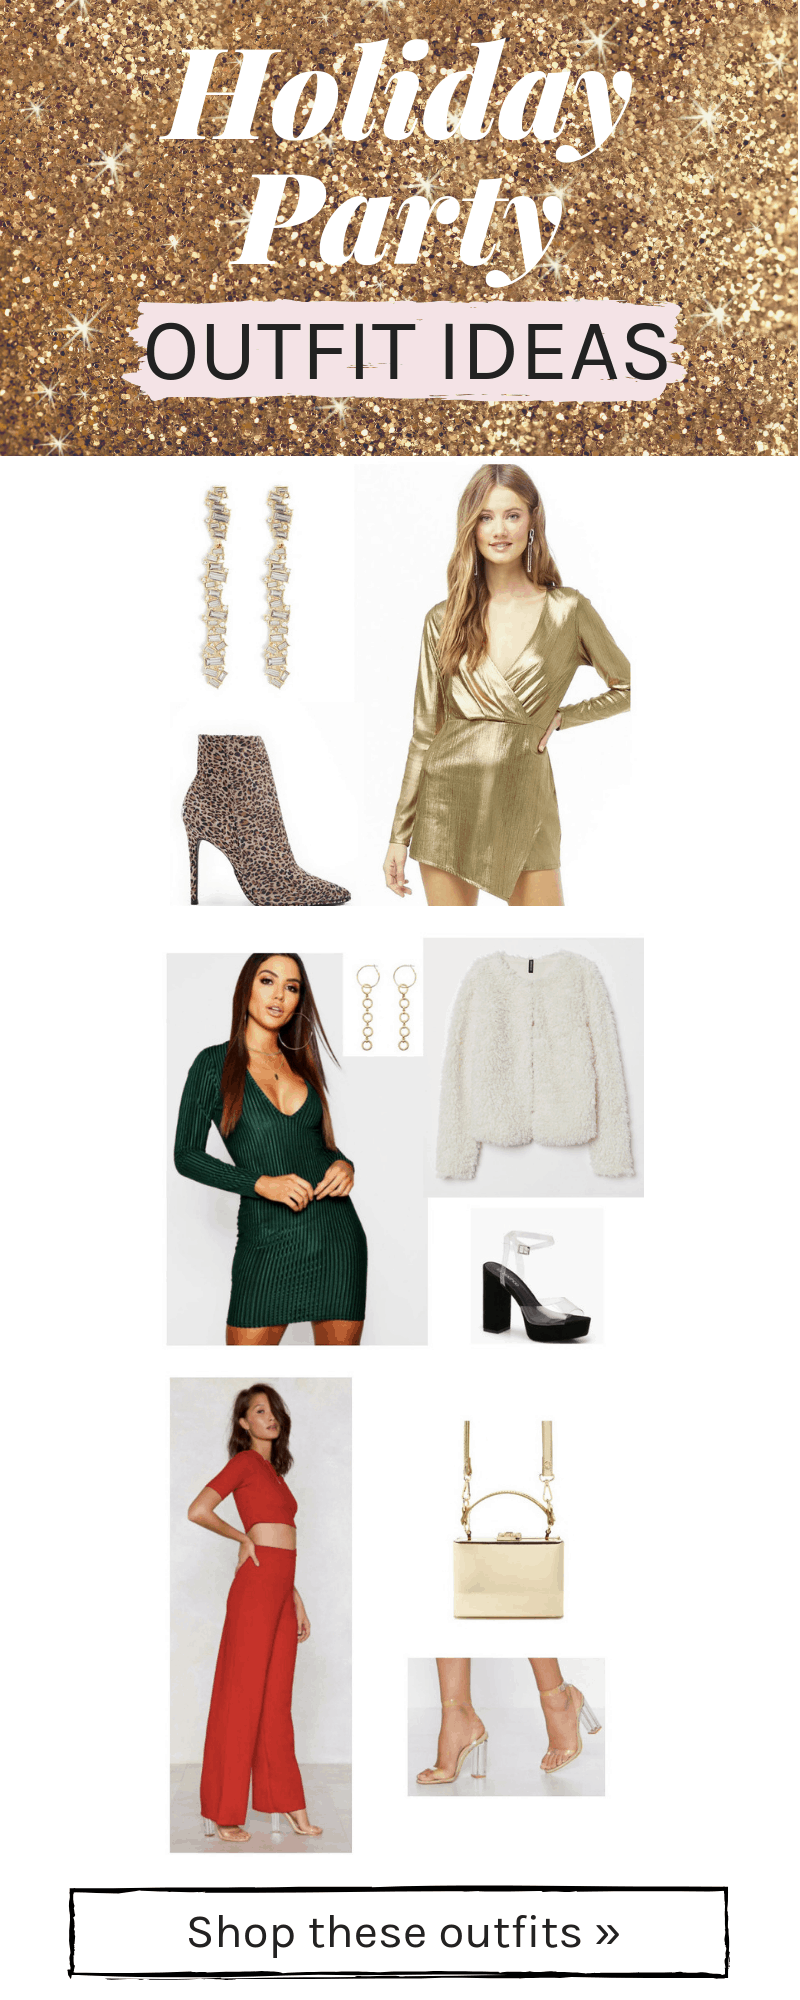 casual holiday party outfits 2018